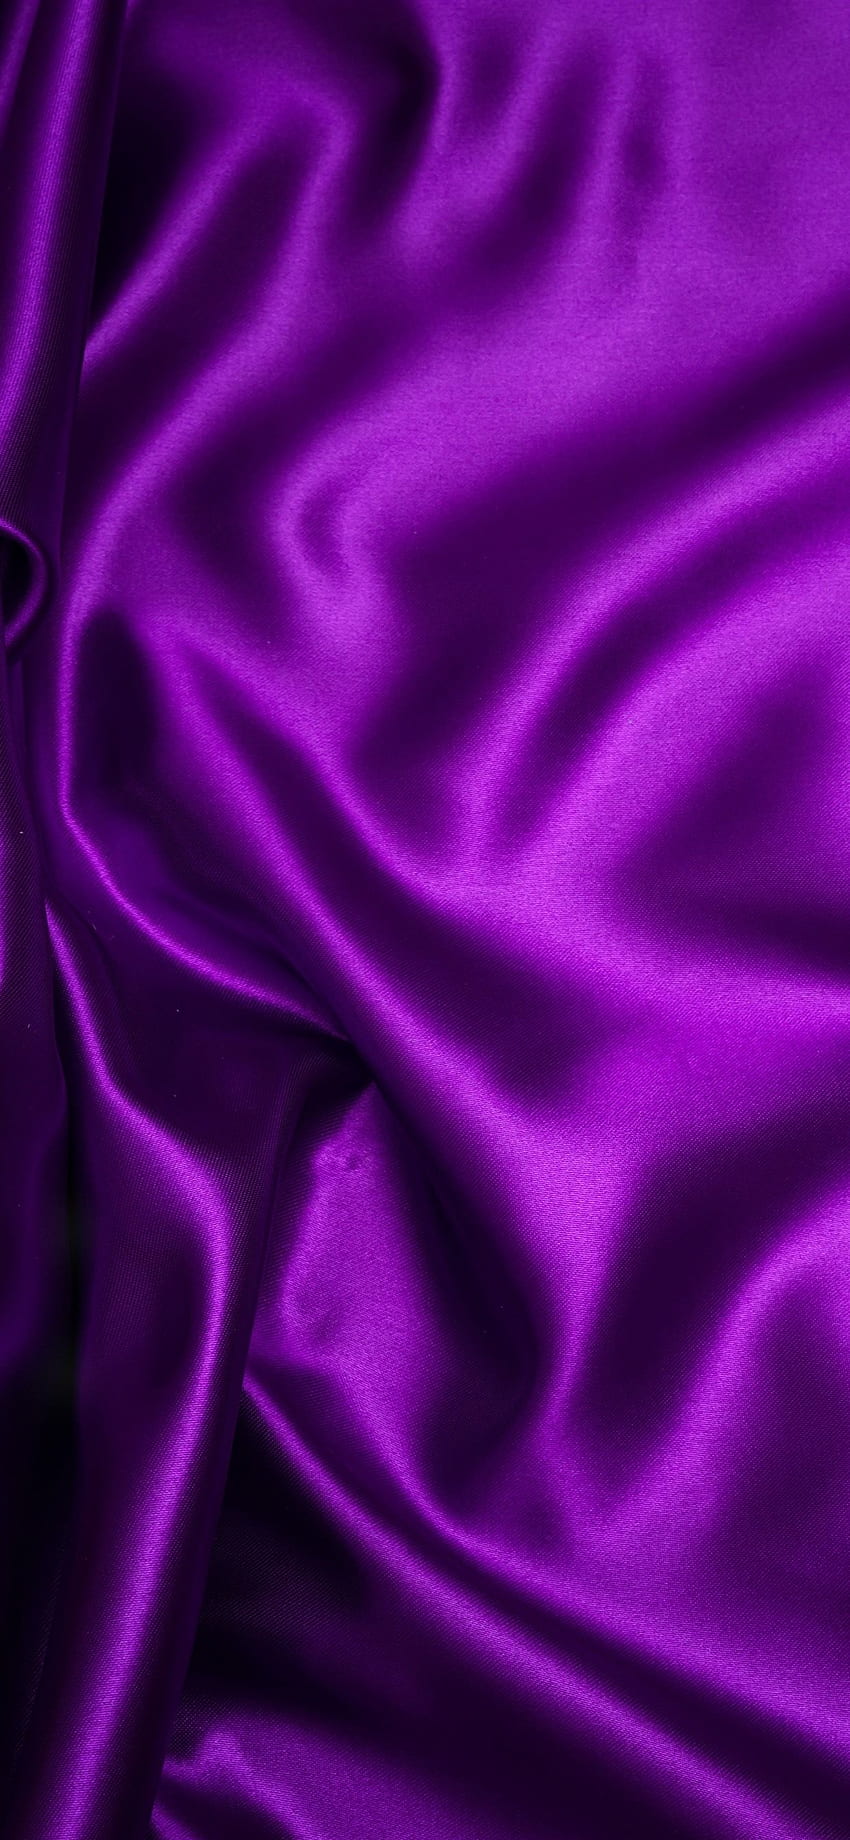 Purple Fabric Texture Background IPhone 11 Pro XS Max, Lilac HD phone wallpaper